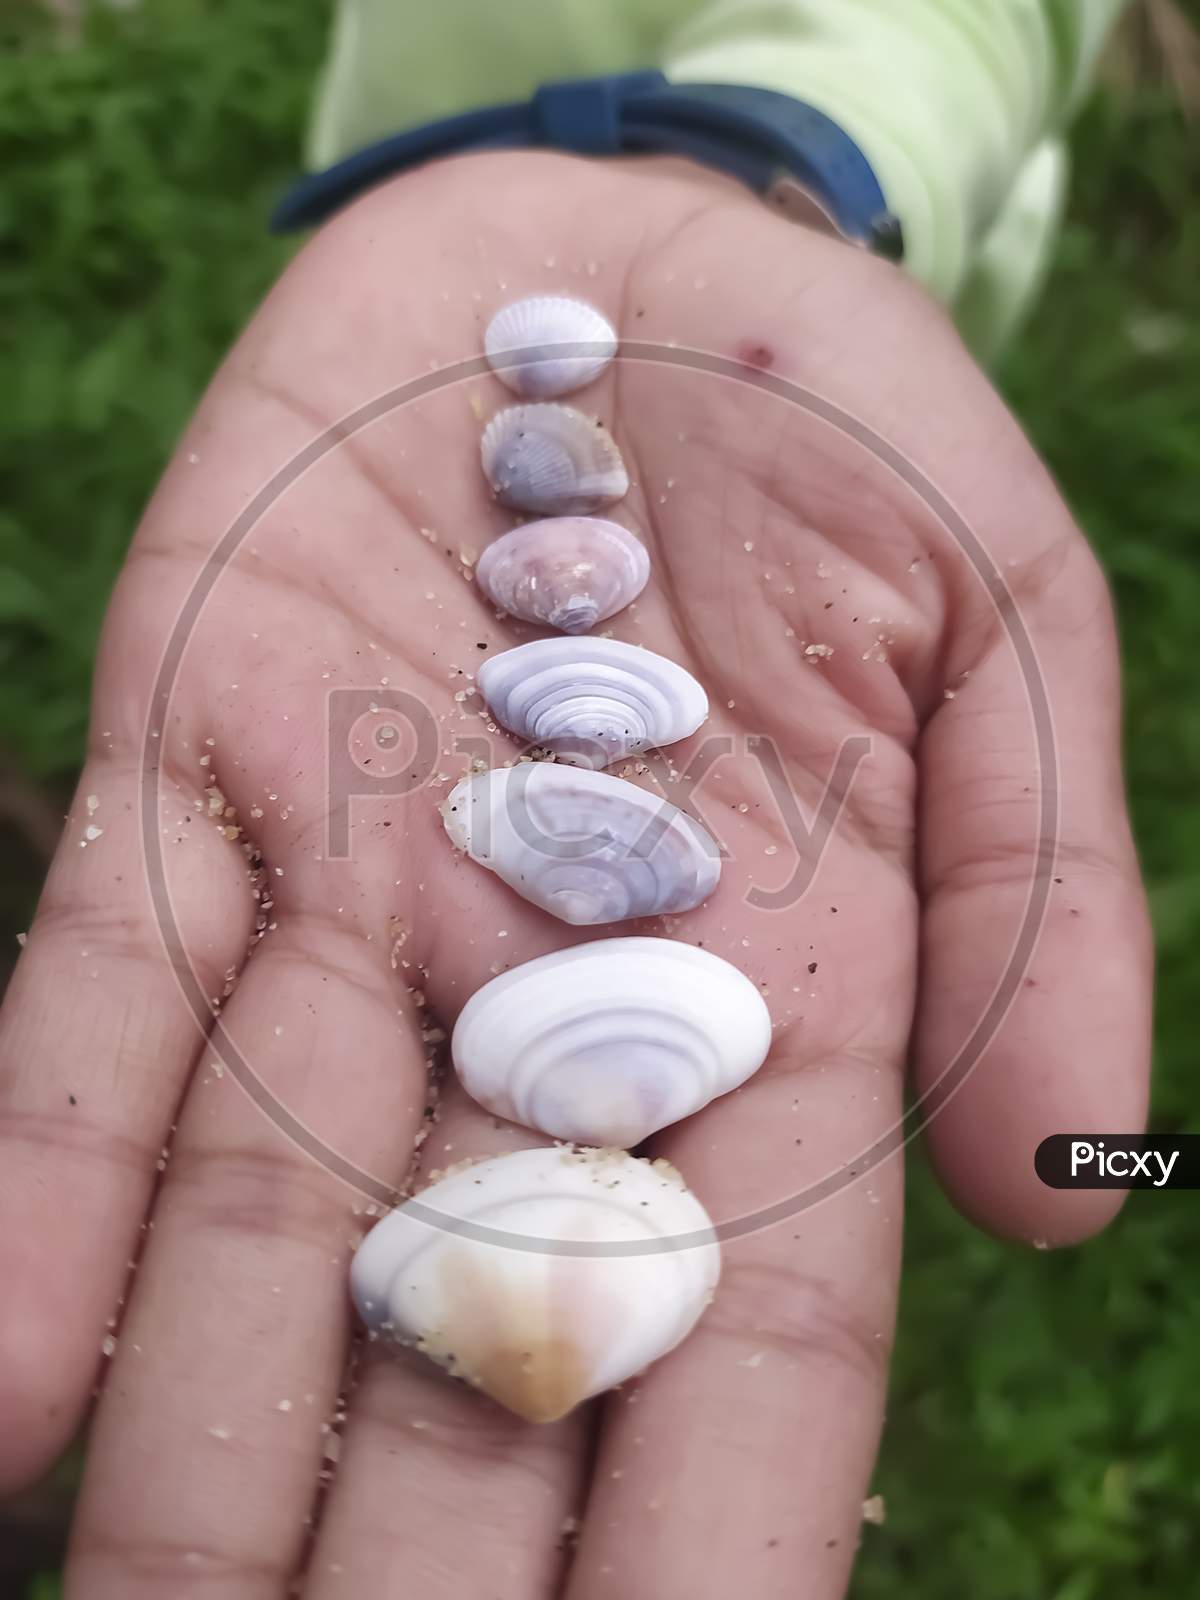 Closeup Of Shells Isolated On A Humans Palm